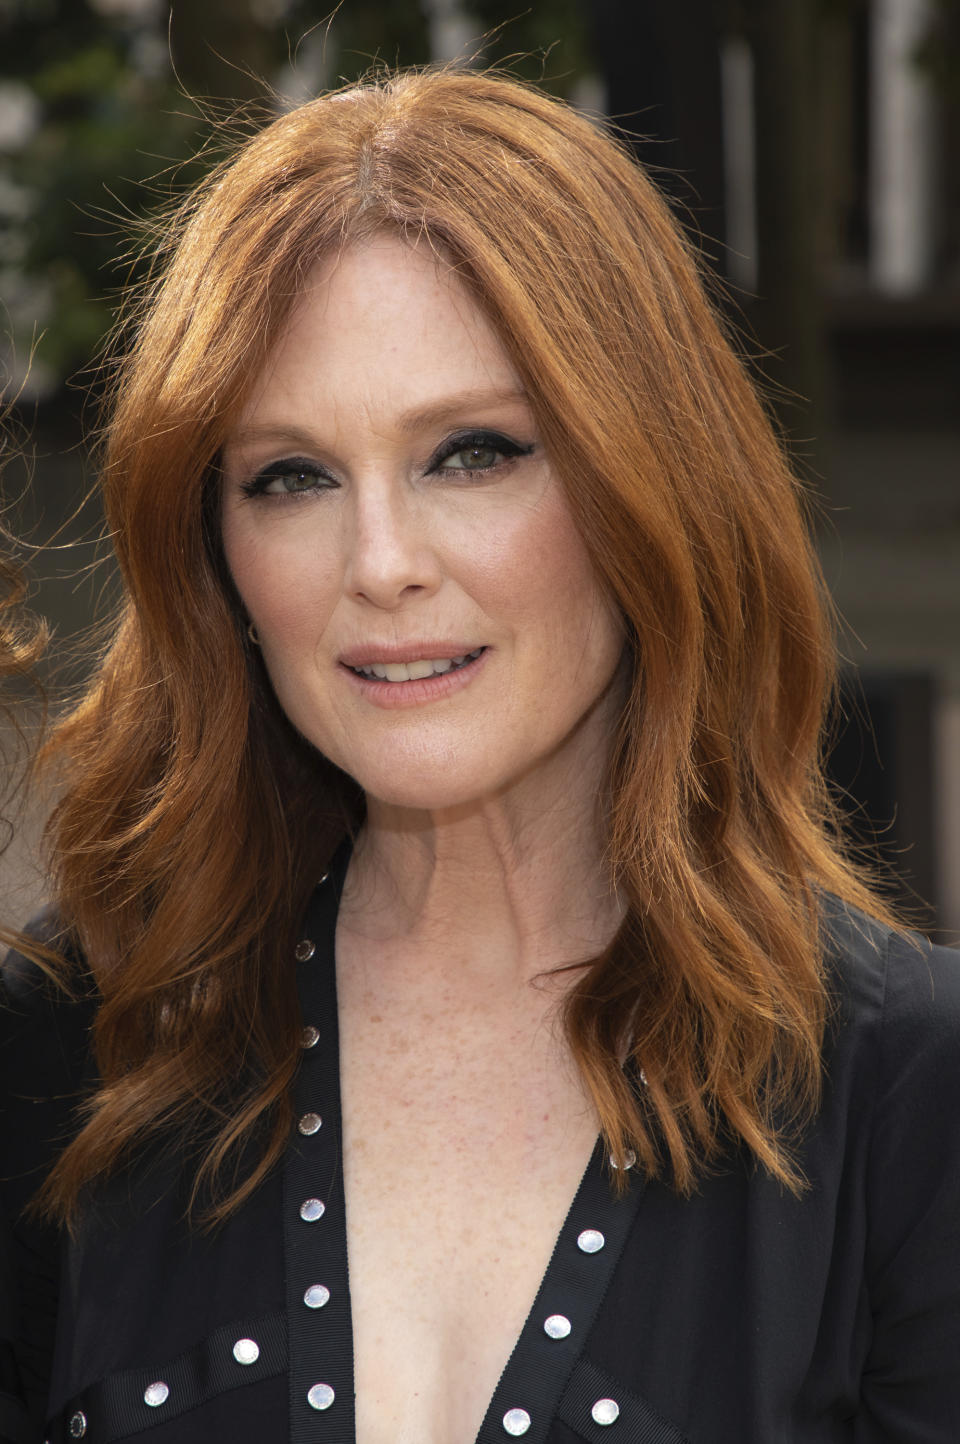 Actress Julianne Moore attends the Longchamp runway show at Lincoln Center during NYFW Spring/Summer 2020 on Saturday, Sept. 7, 2019, in New York. (Photo by Brent N. Clarke/Invision/AP